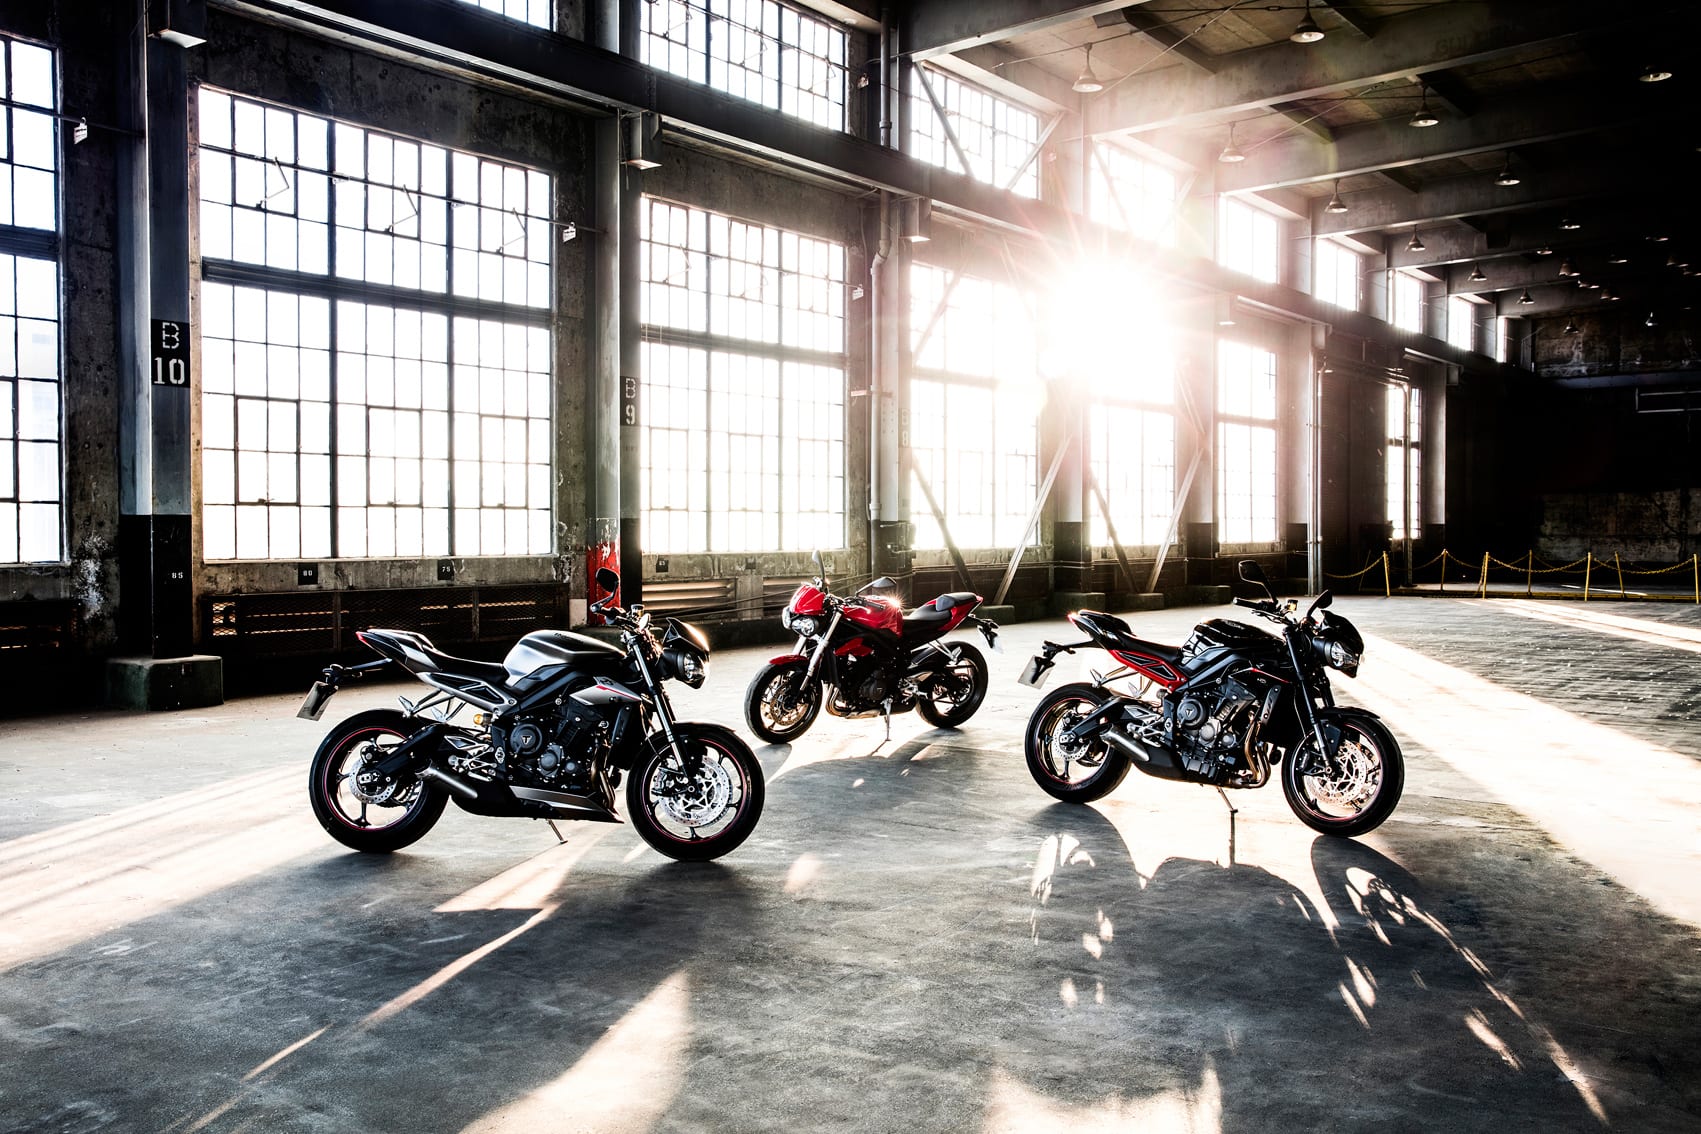 Triumph Breaks Their Sales Record in 2016